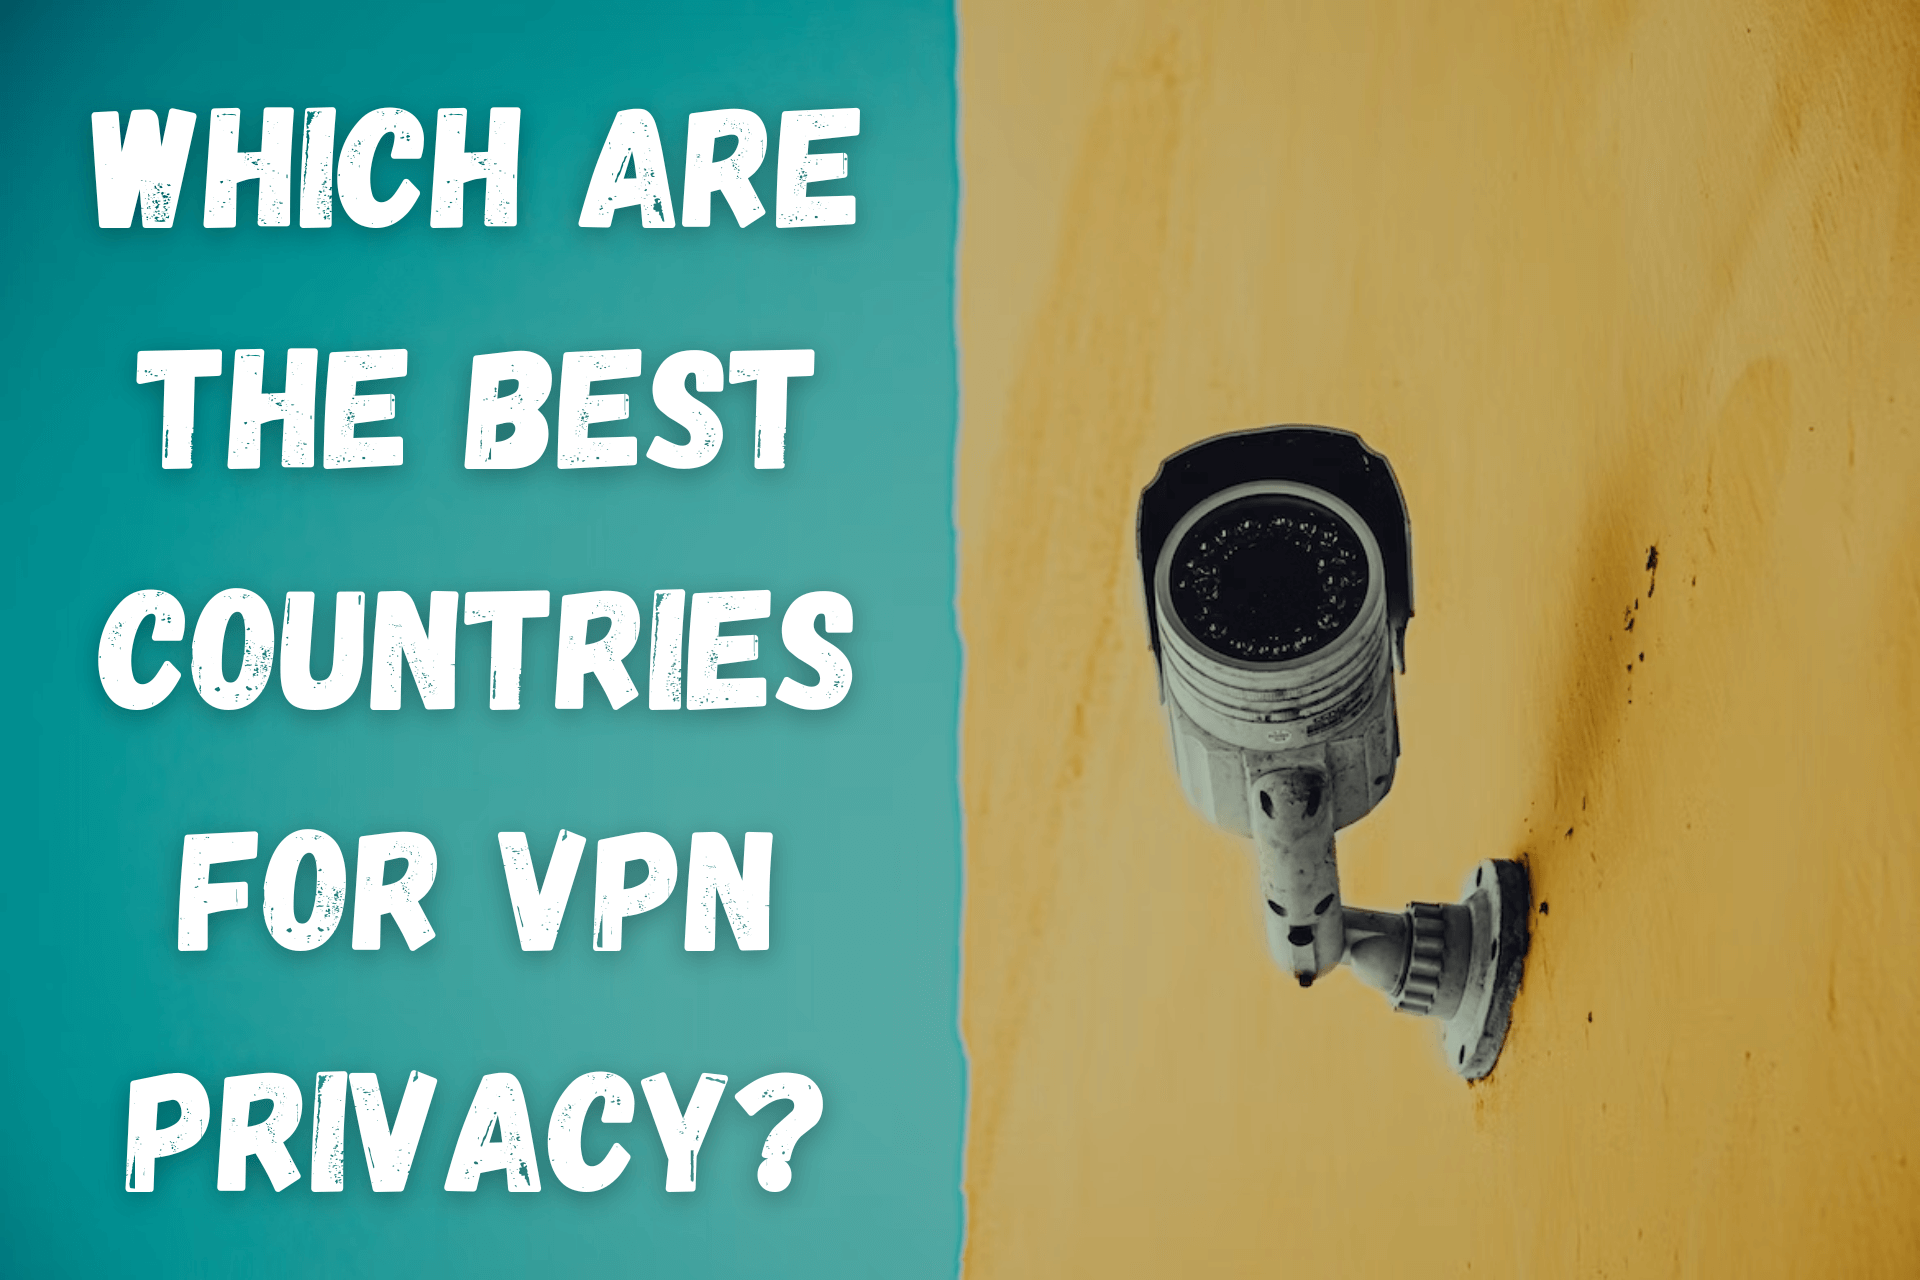 Best countries for VPN privacy